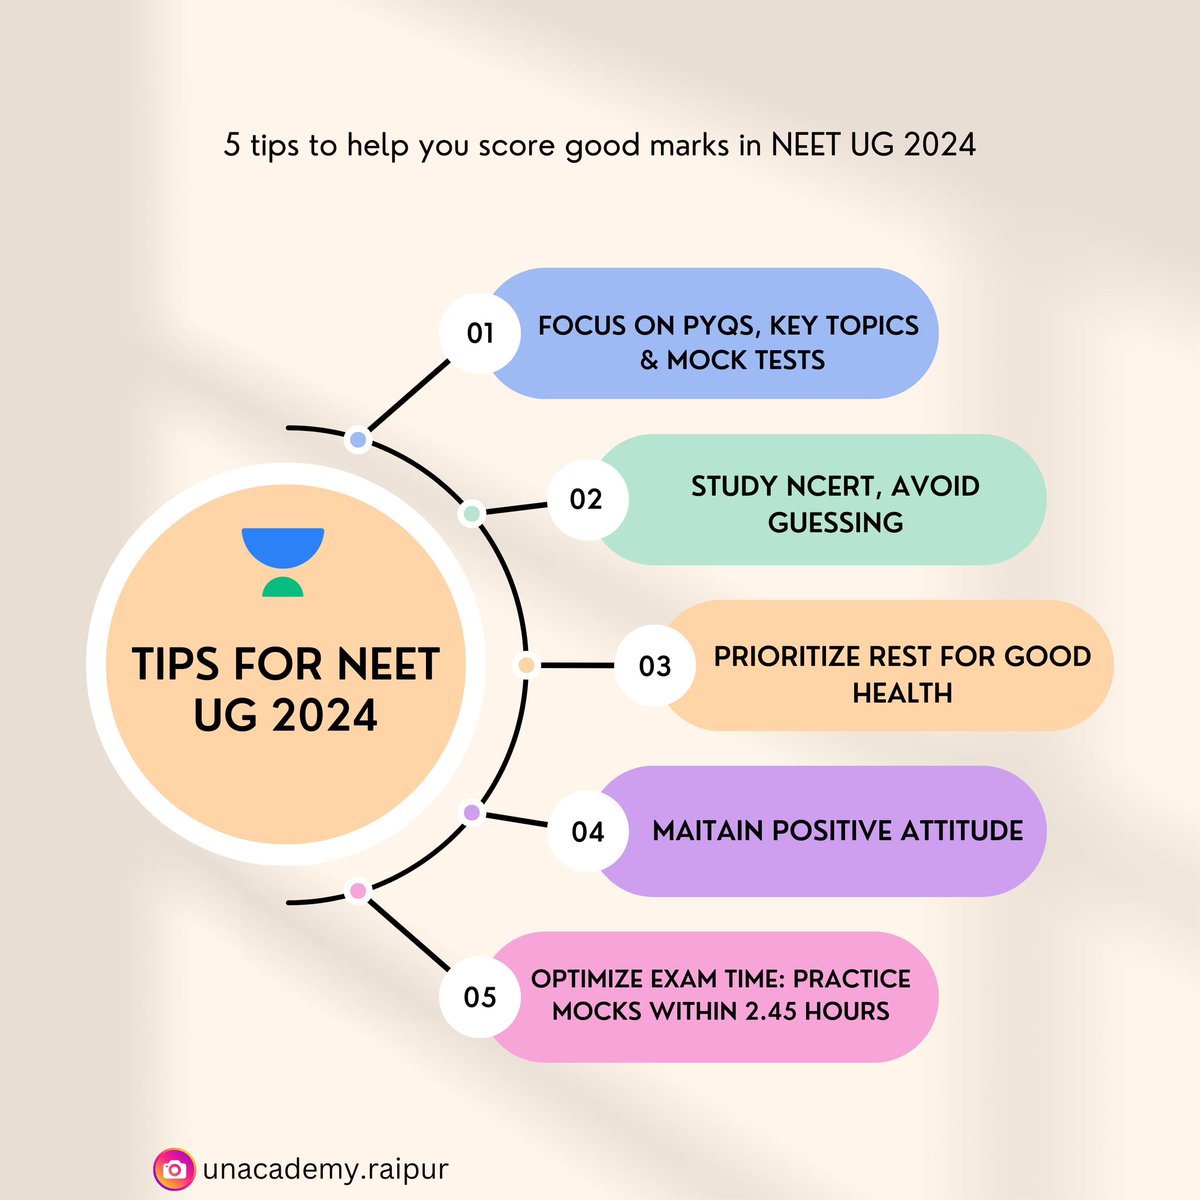 Tips for Last minute preparation for NEET UG 2025

All the Best guys!!

Let’s crack it!!

#unacademy #letscrackit #neet #neet2025 #neetug #neetug2025 #neetpreparation #neetaspirants #nta